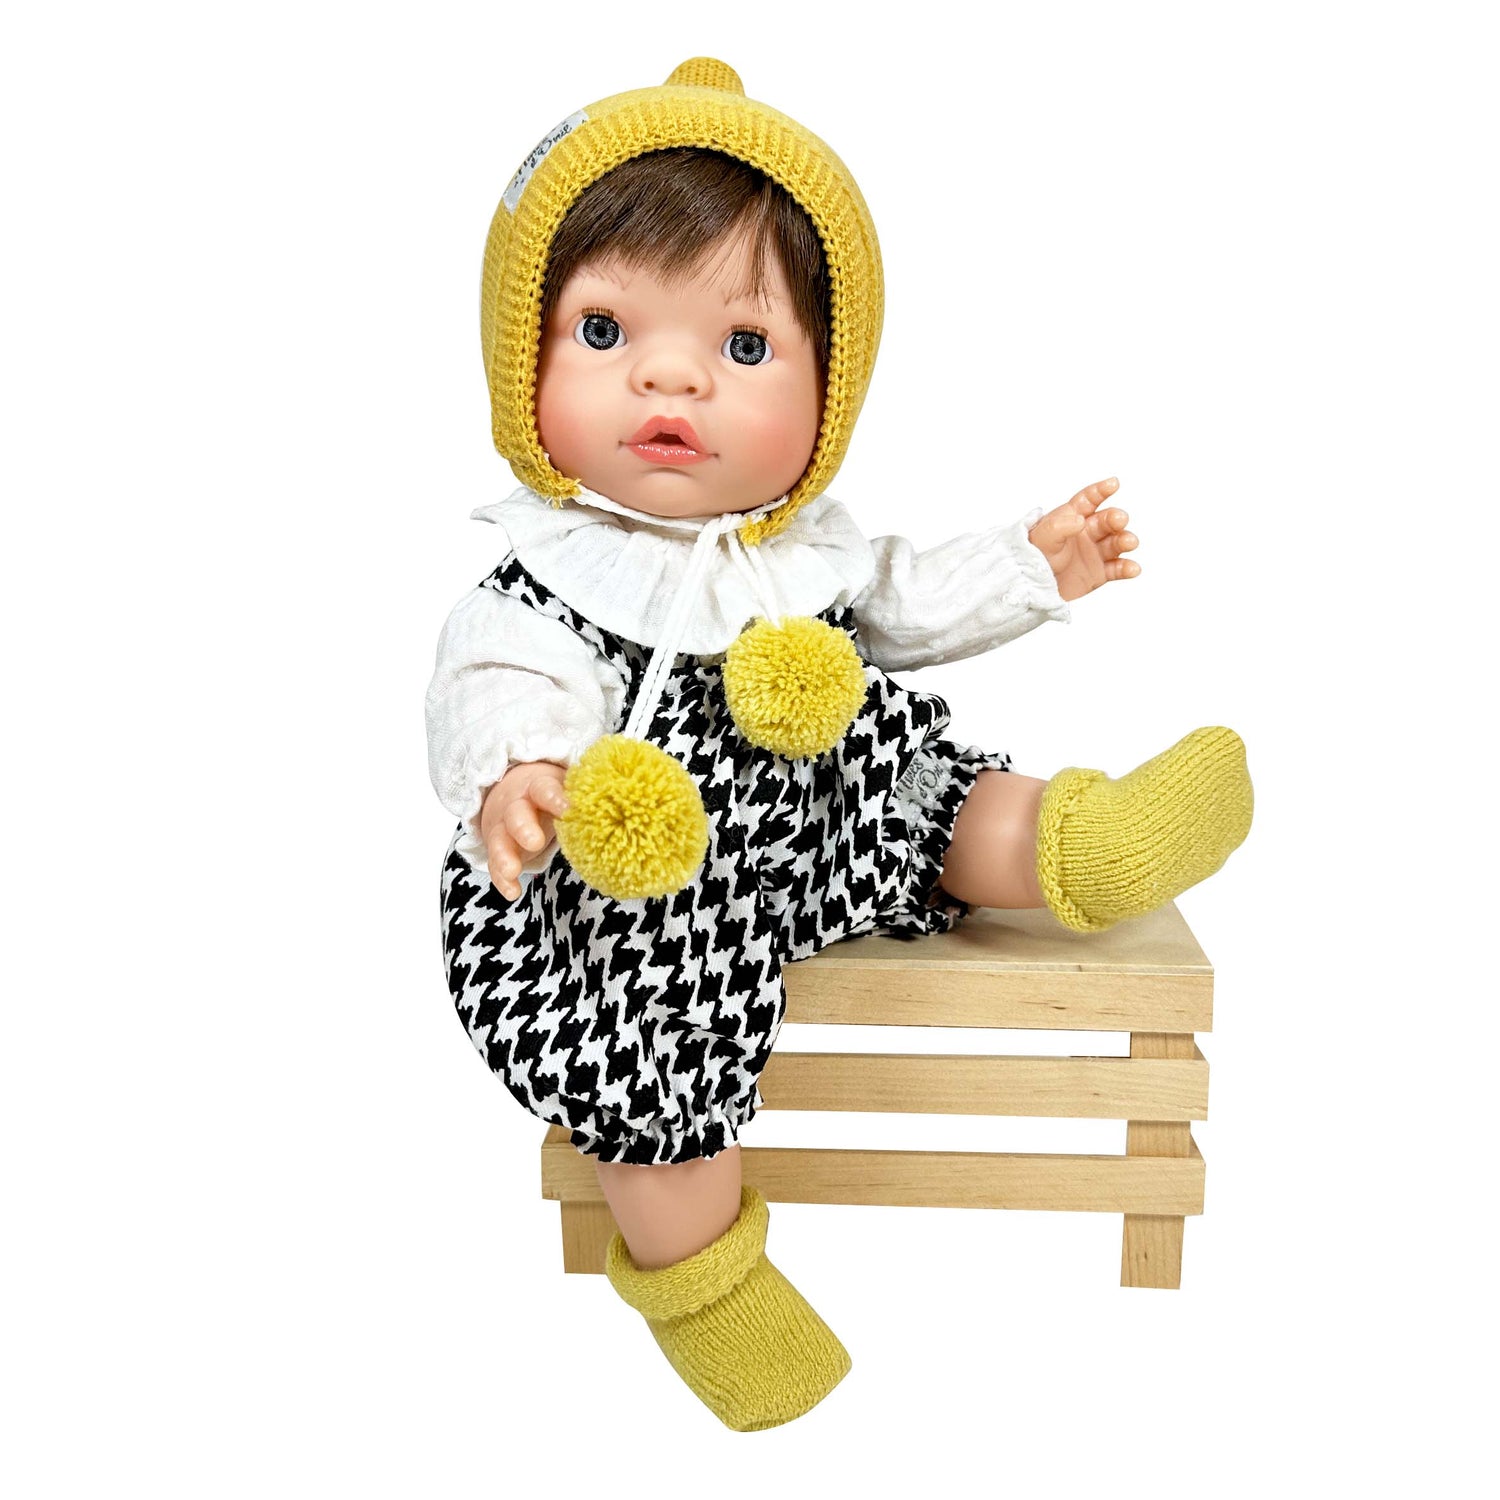 Handmade Collectible Joy Collection Baby Doll (3030) by Nines D&